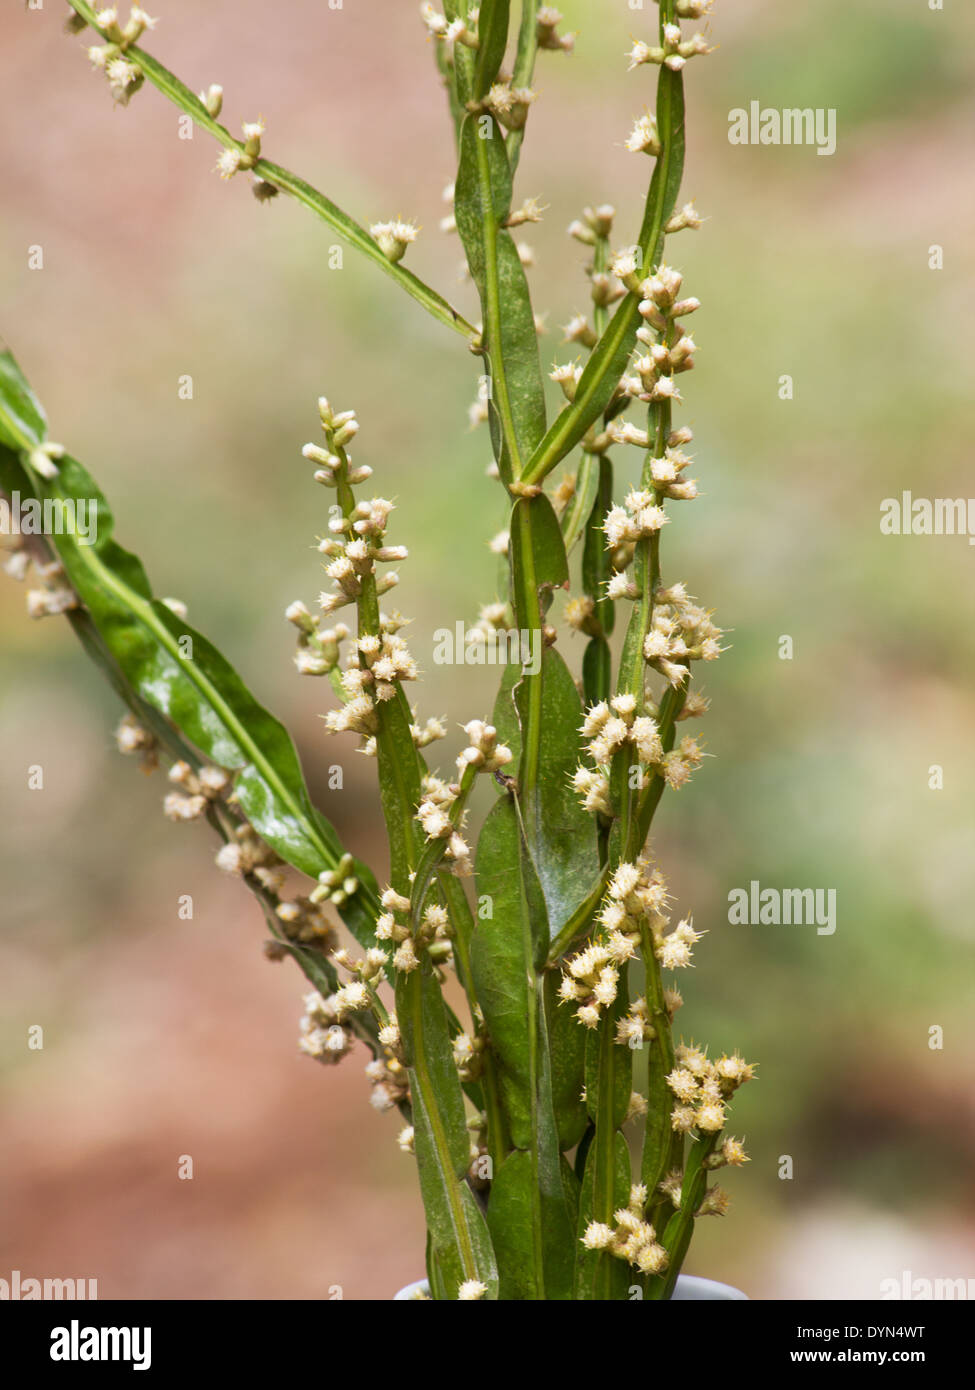 Baccharis trimera plant in bloom on natural background Stock Photo